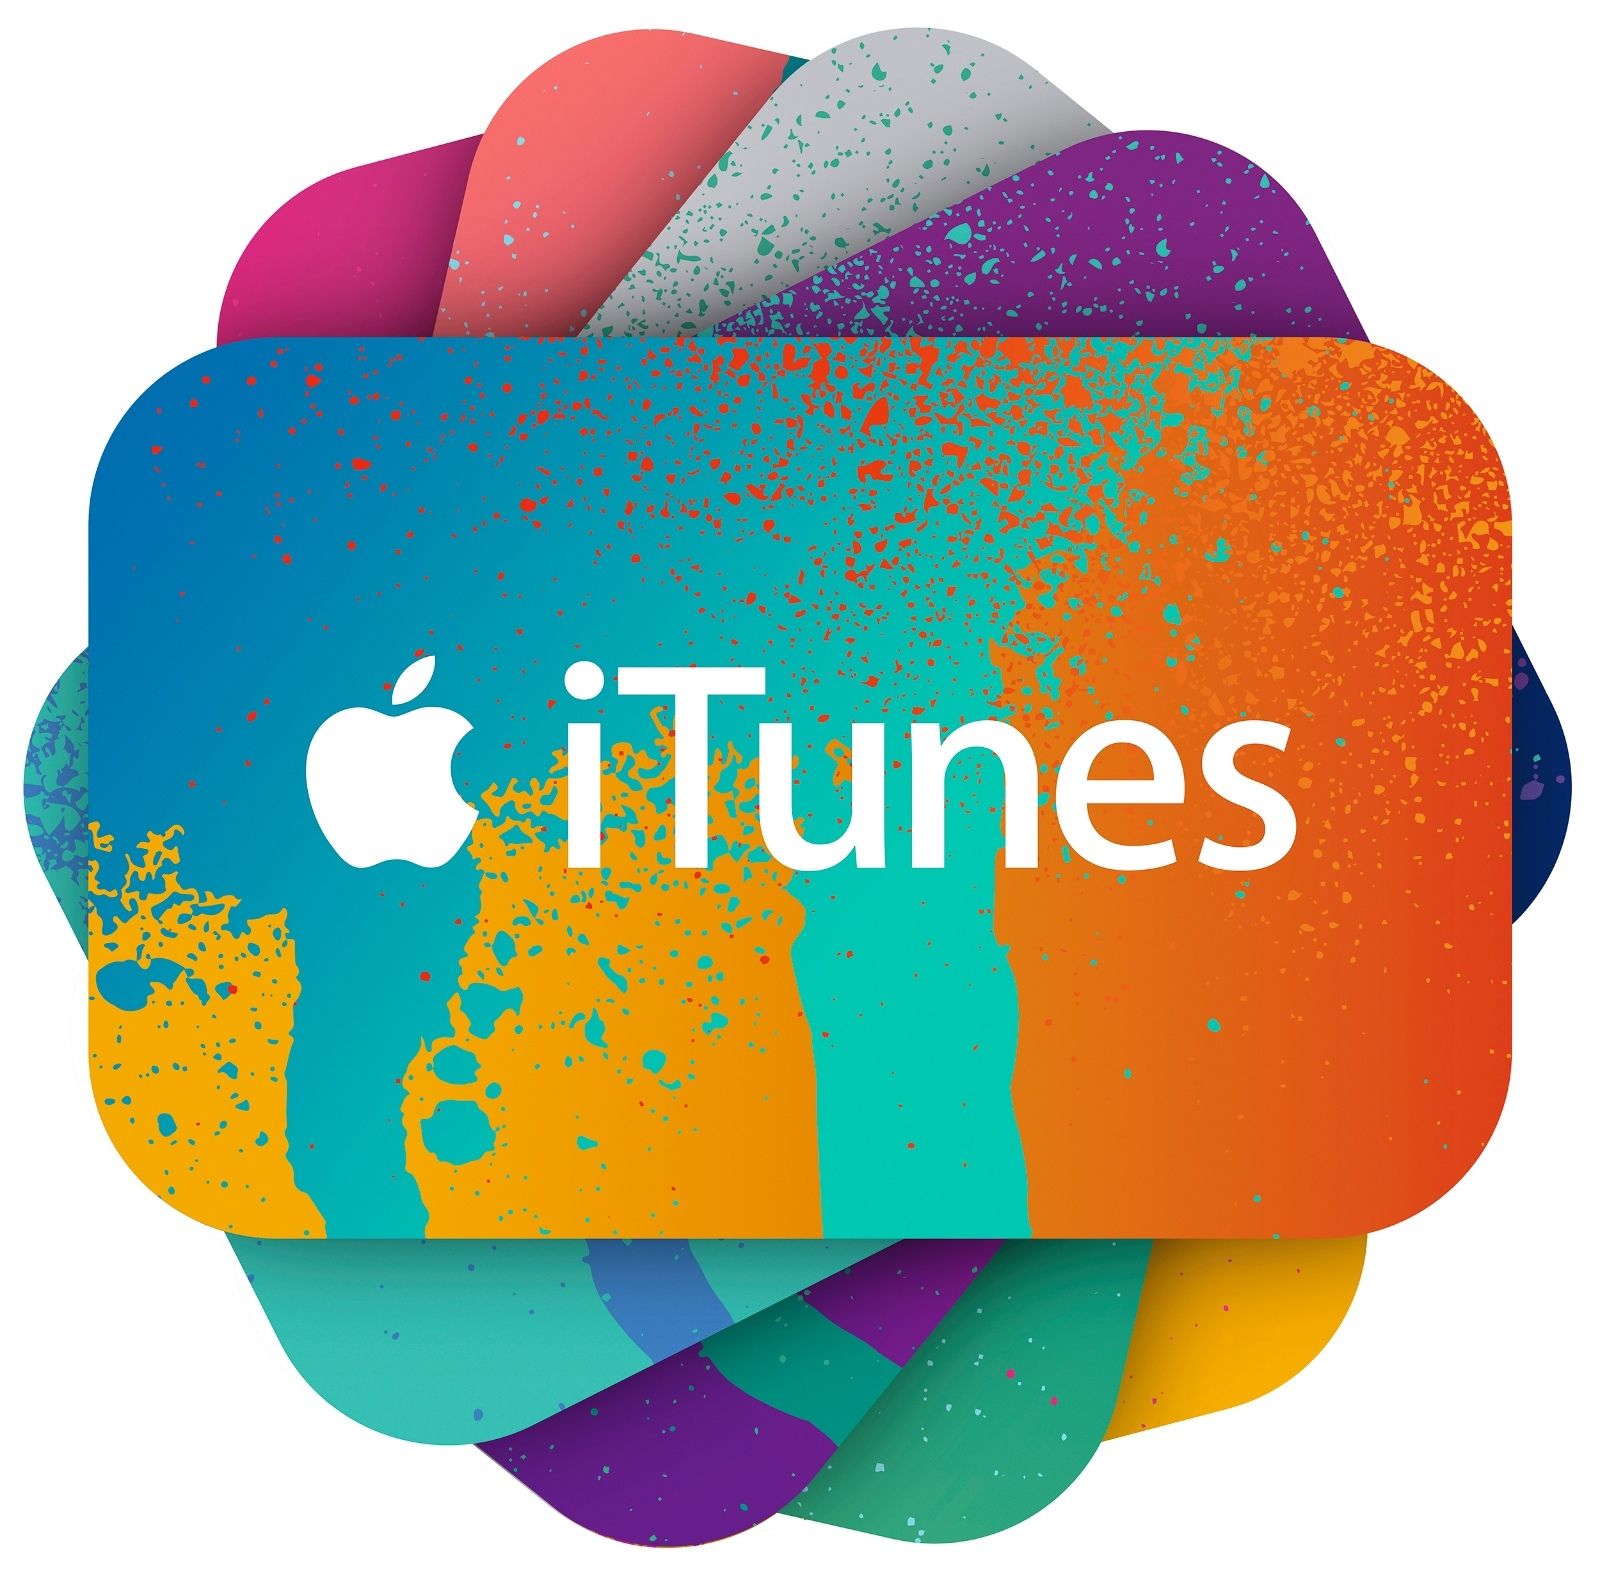 Unadvertised ITunes gift card sale at Kroger (through 12/20) - Points with  a Crew